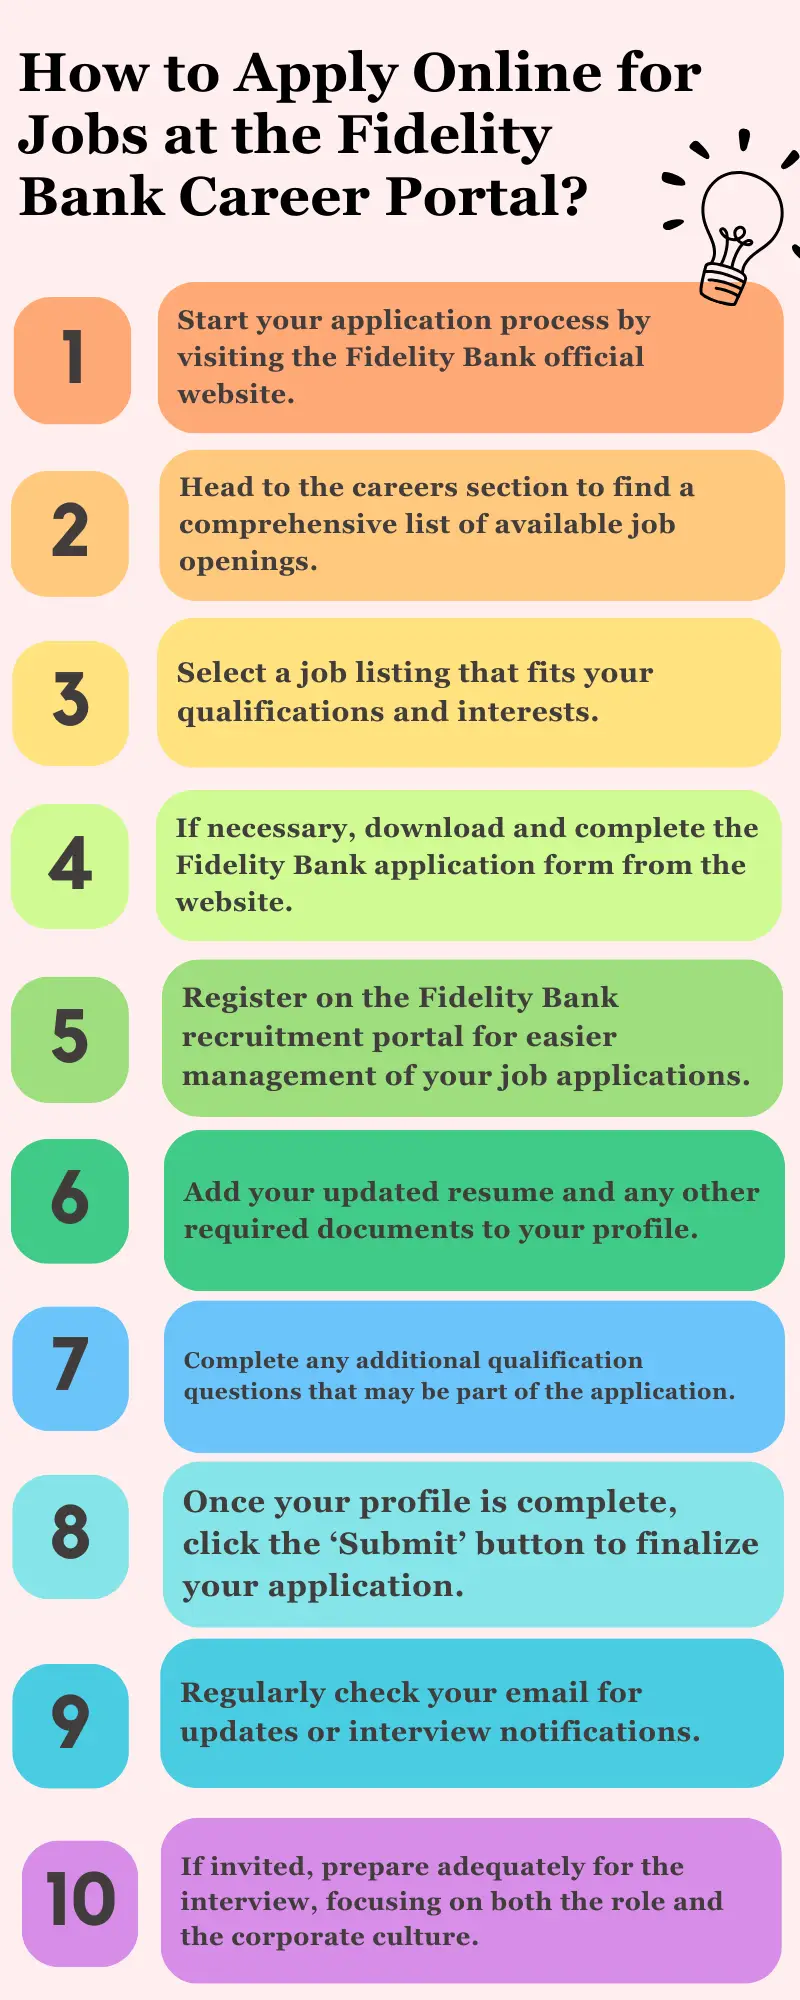 How to Apply Online for Jobs at the Fidelity Bank Career Portal? 